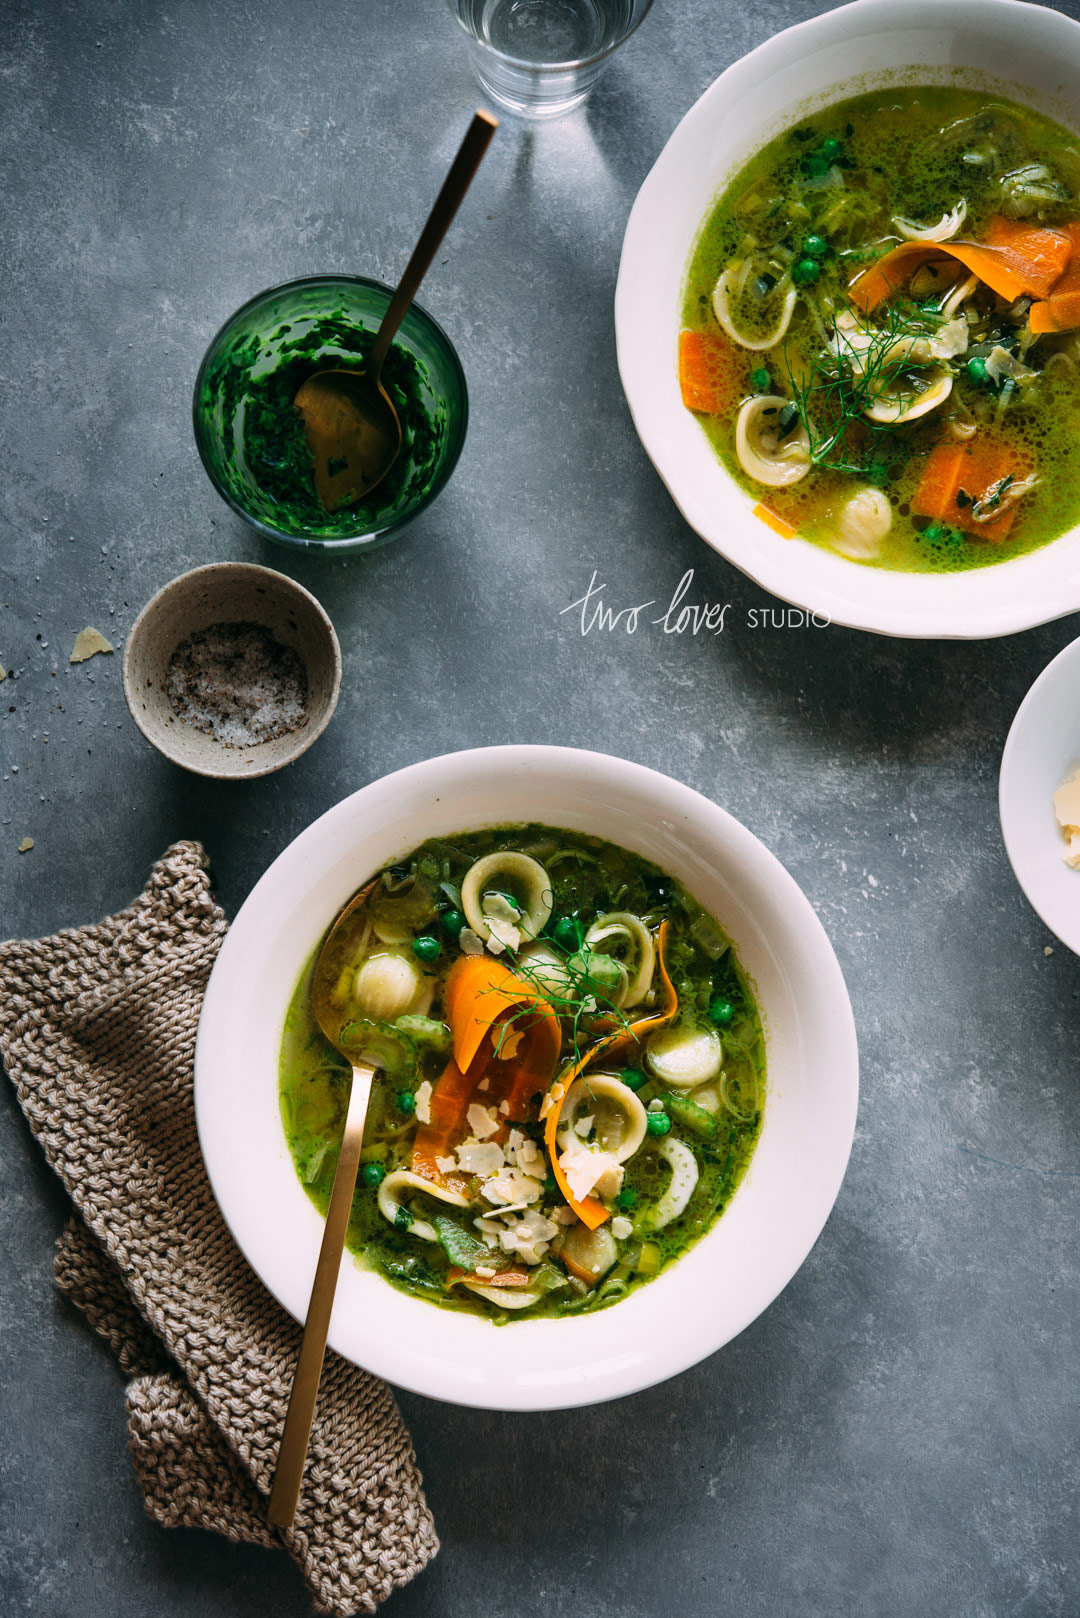 Two-Loves-Studio-Green-Minestrone-Soup-Food-Photography-Goals